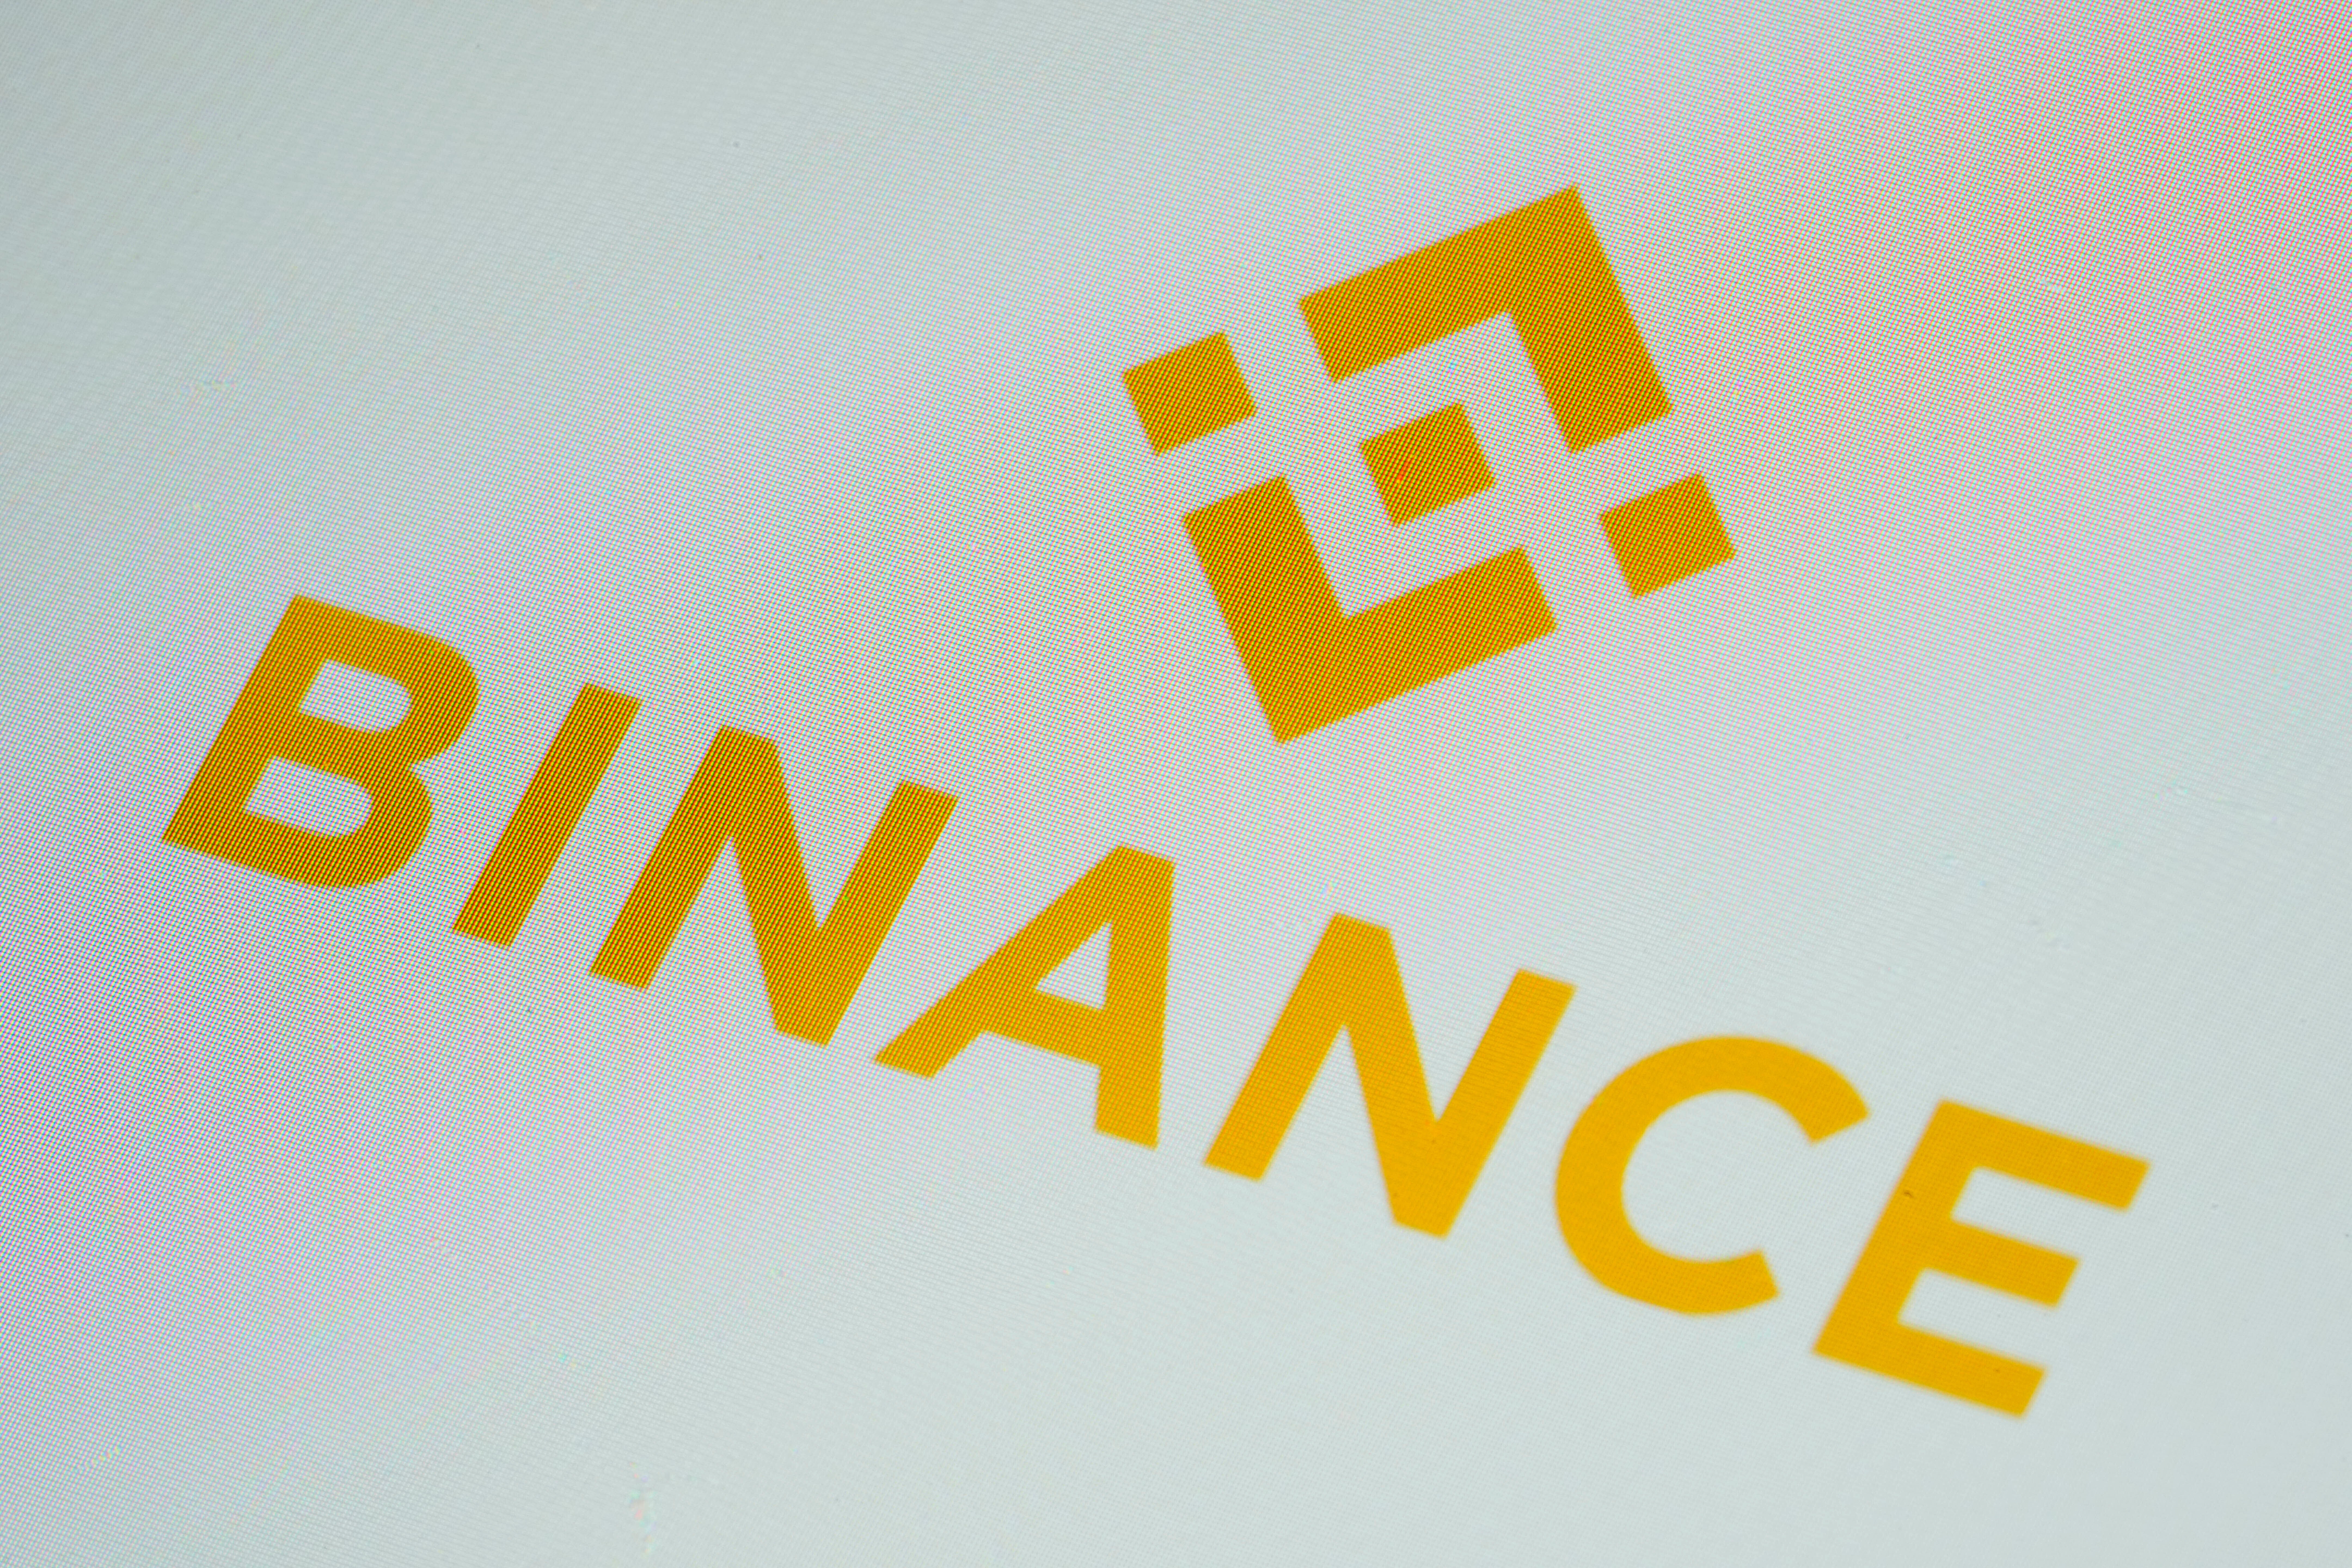 Binance is the world’s largest cryptocurrency exchange